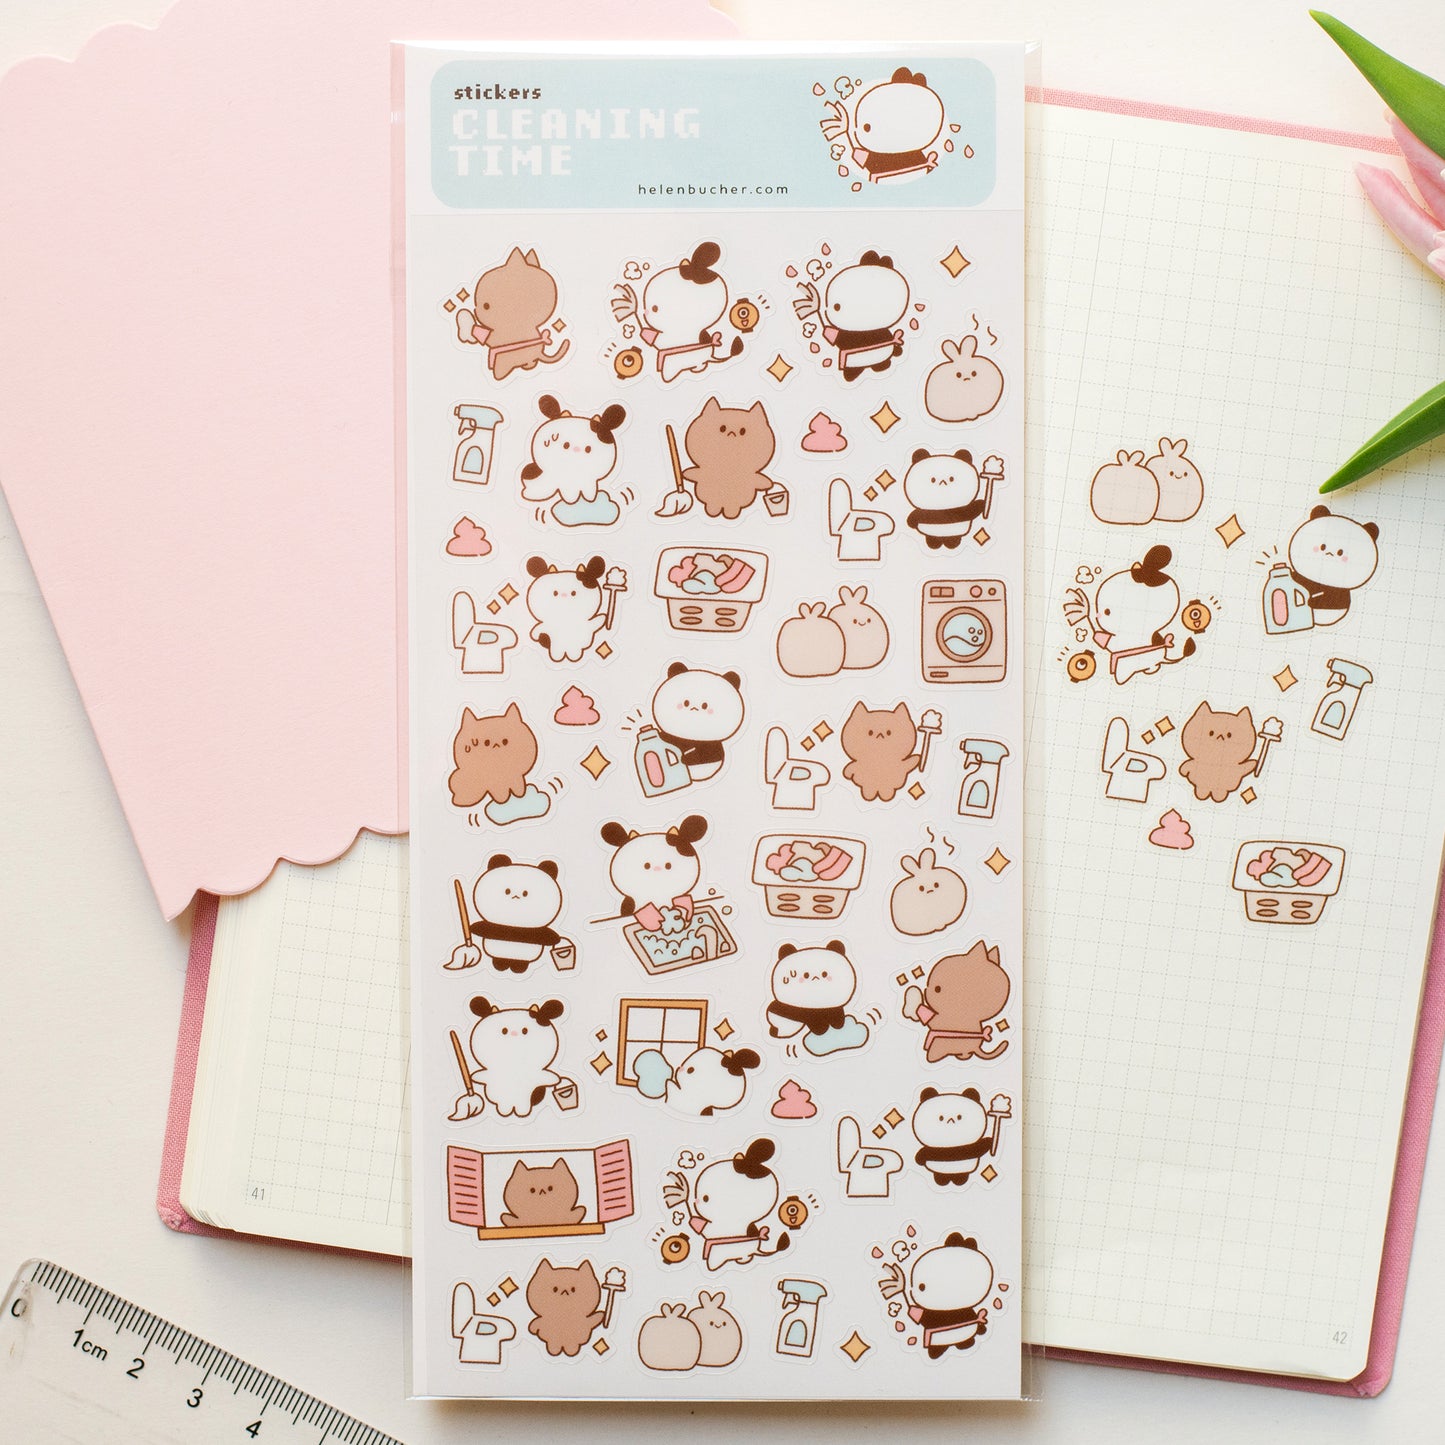 Cleaning Time - Sticker Sheet - Clear Stickers